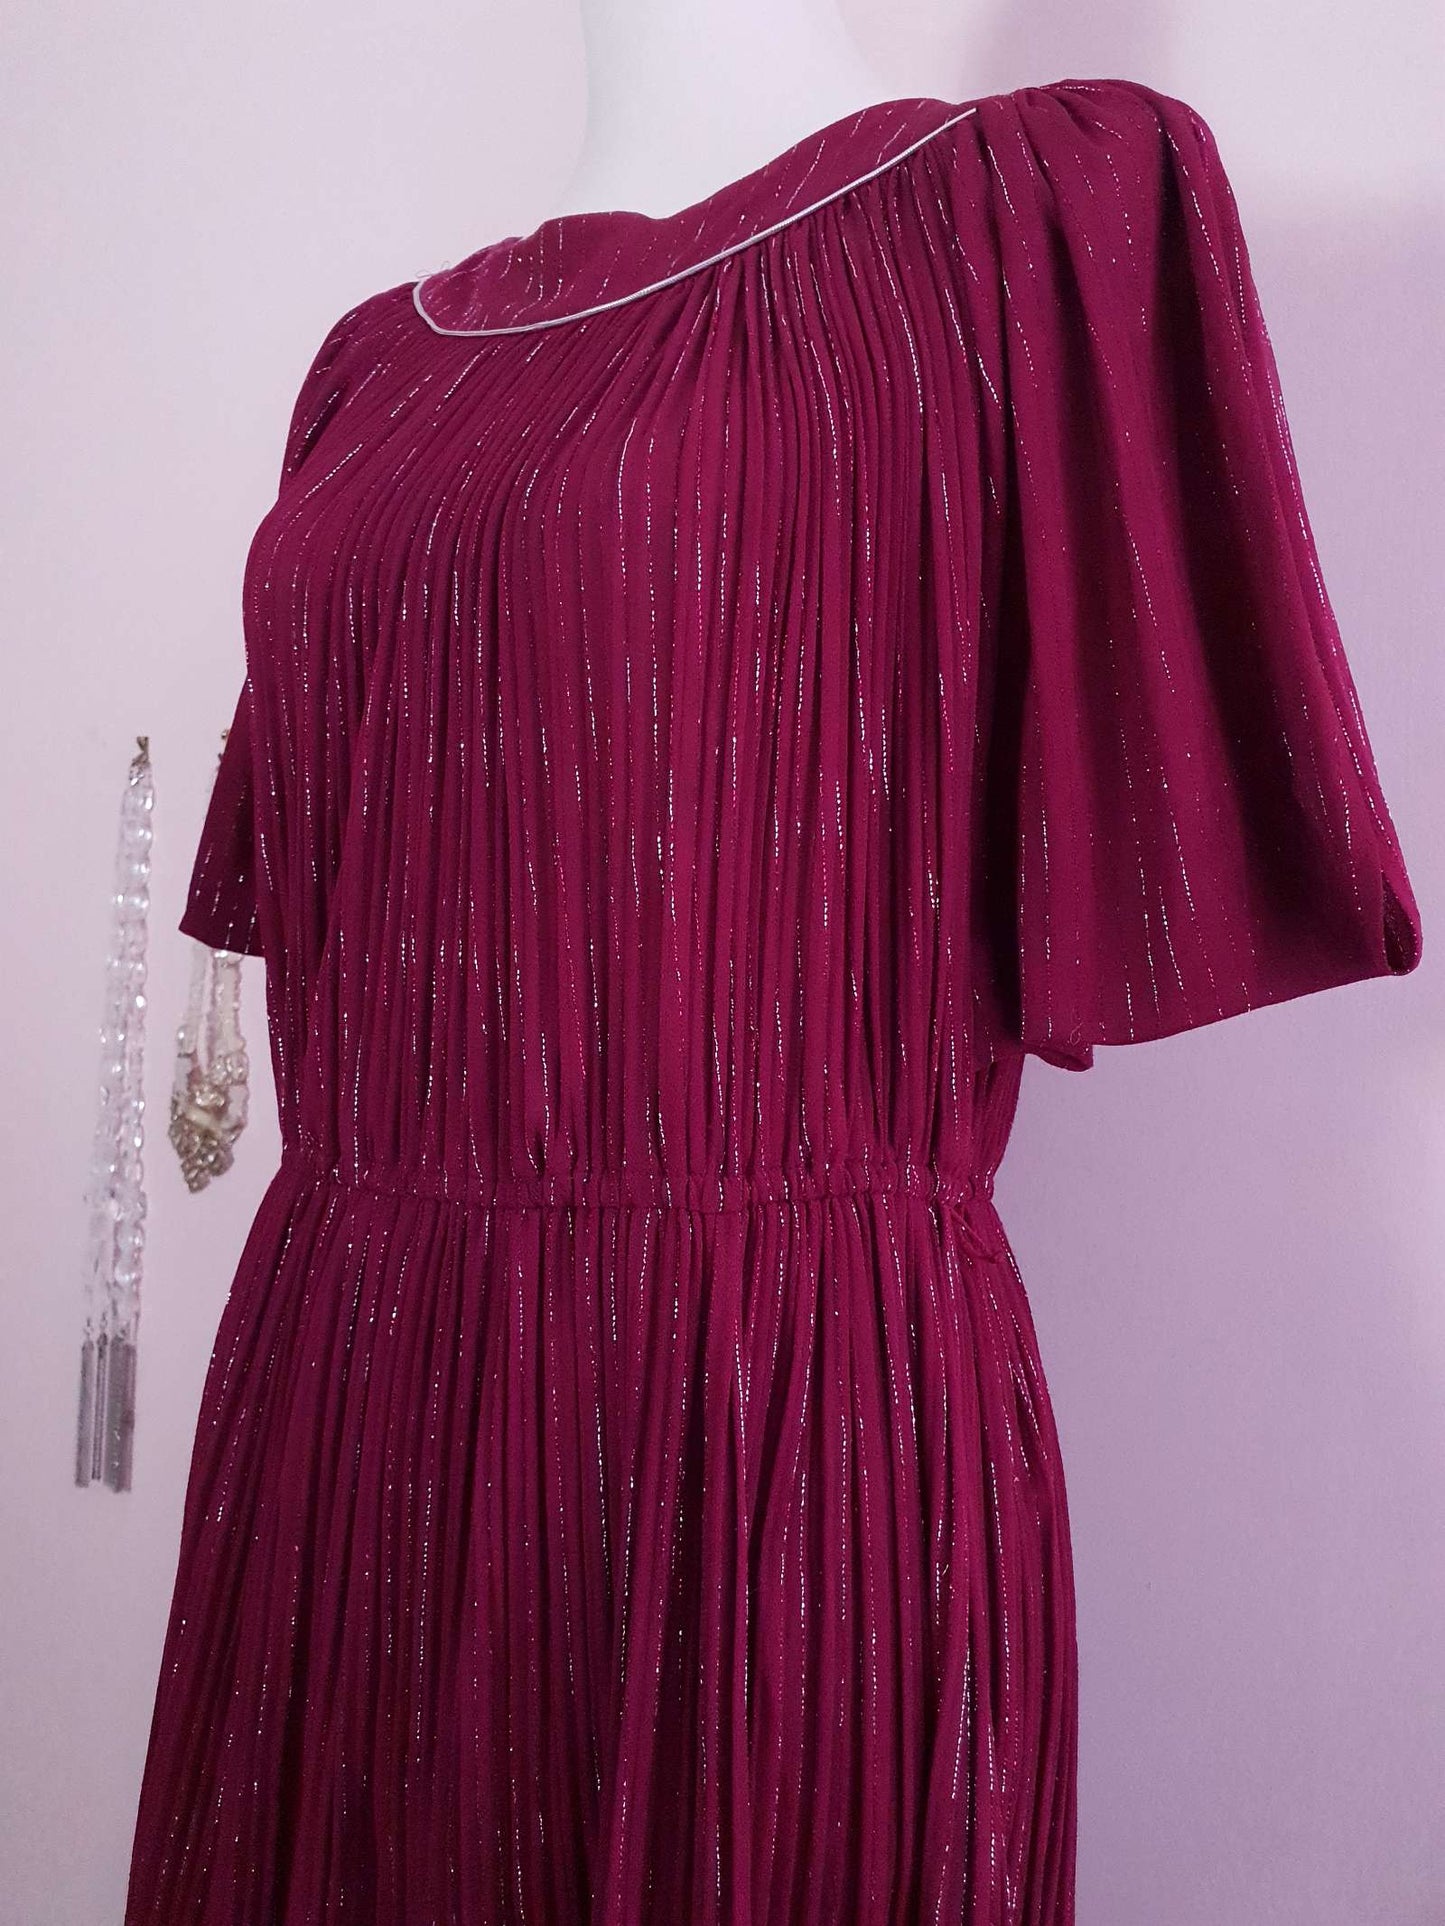 Burgundy Red Midi Dress 1970s  - Sparkle Batwing Sleeves Size 16